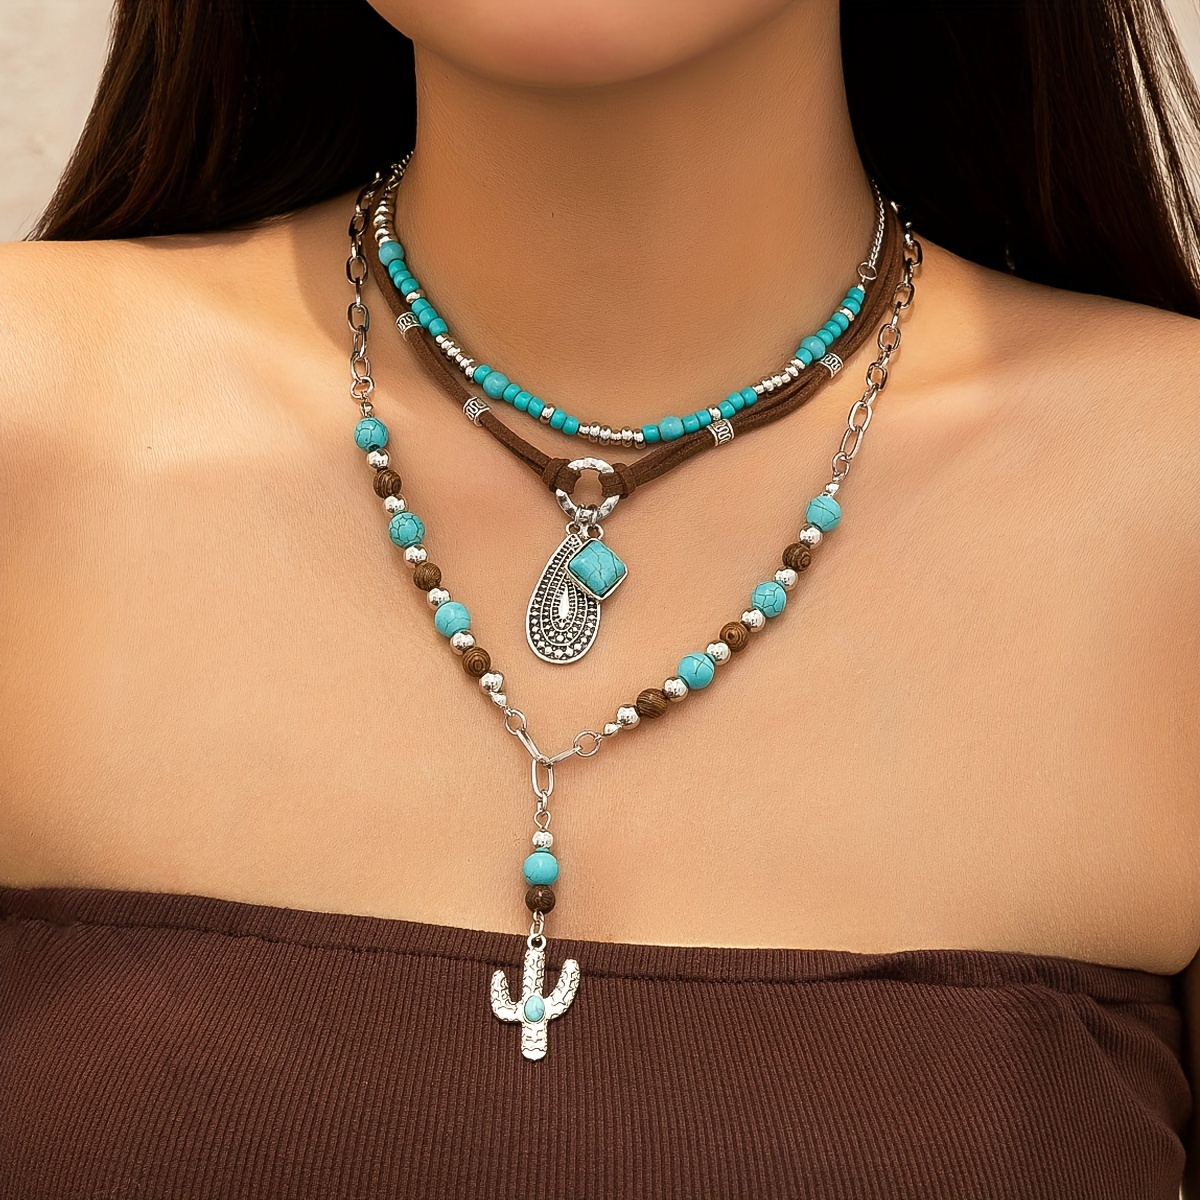 

Bohemian Vintage Style Pendant Necklaces Set For Women, 3 Pieces, Featuring Cactus And Teardrop Charms, Acrylic Turquoise Beaded, No Plating - Ideal For Daily Wear And Parties